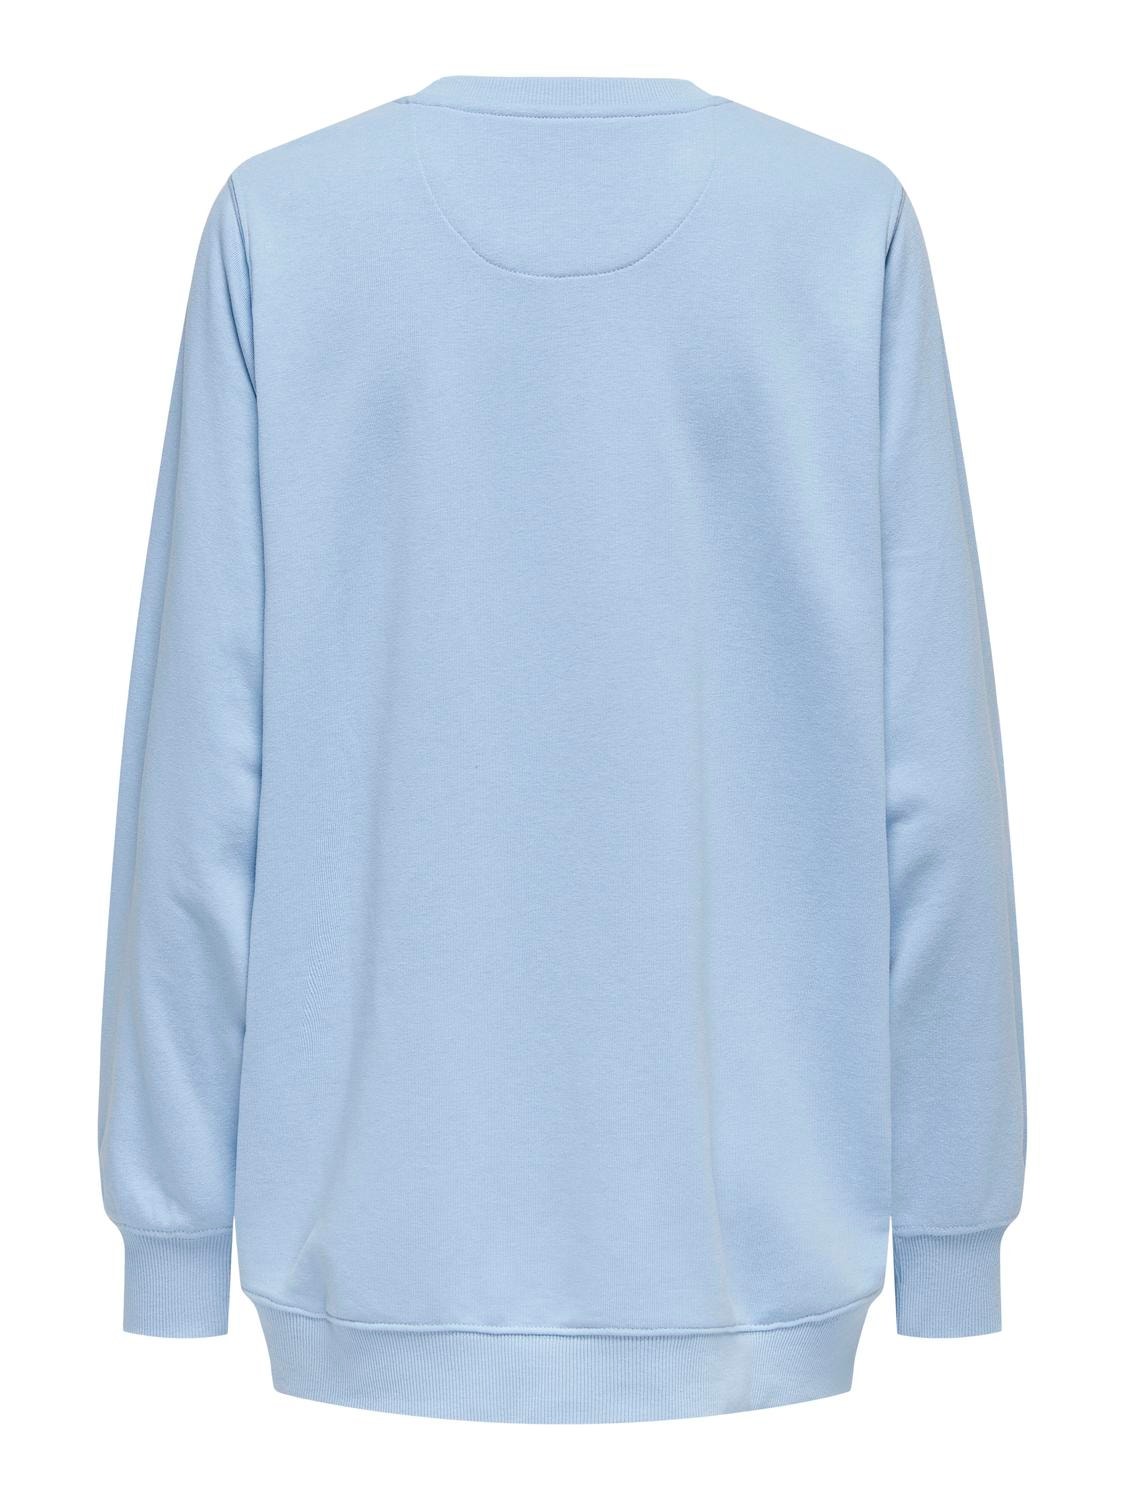 ONLY Long Line Fit Round Neck Sweatshirts -Clear Sky - 15312099